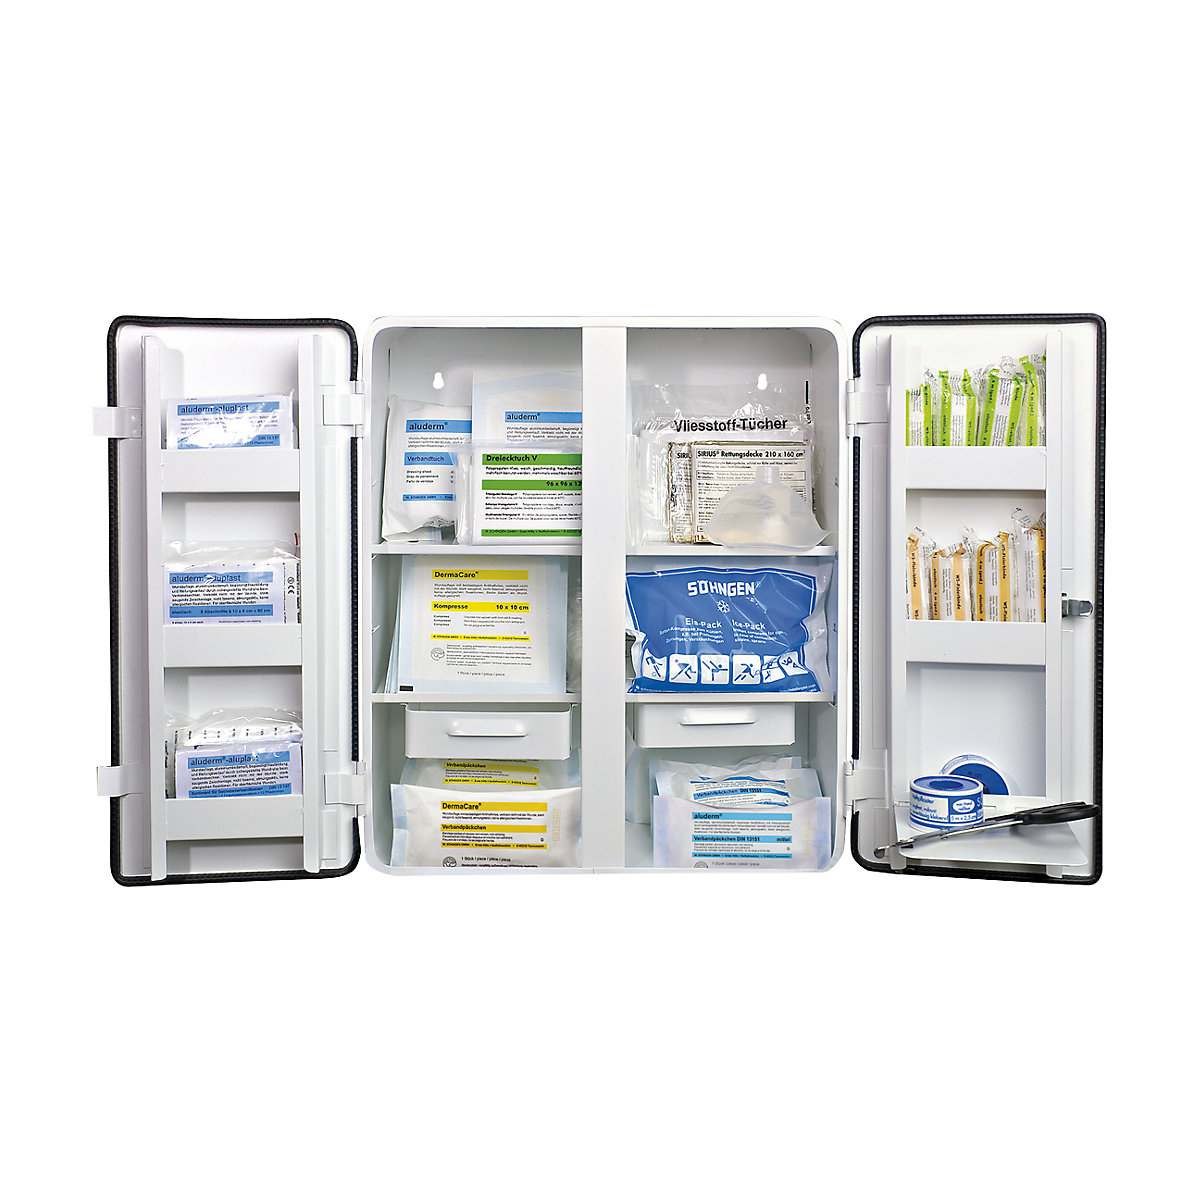 SÖHNGEN – First aid cupboard, DIN 13169, double door, white, HxWxD 462 x 404 x 170 mm, with contents